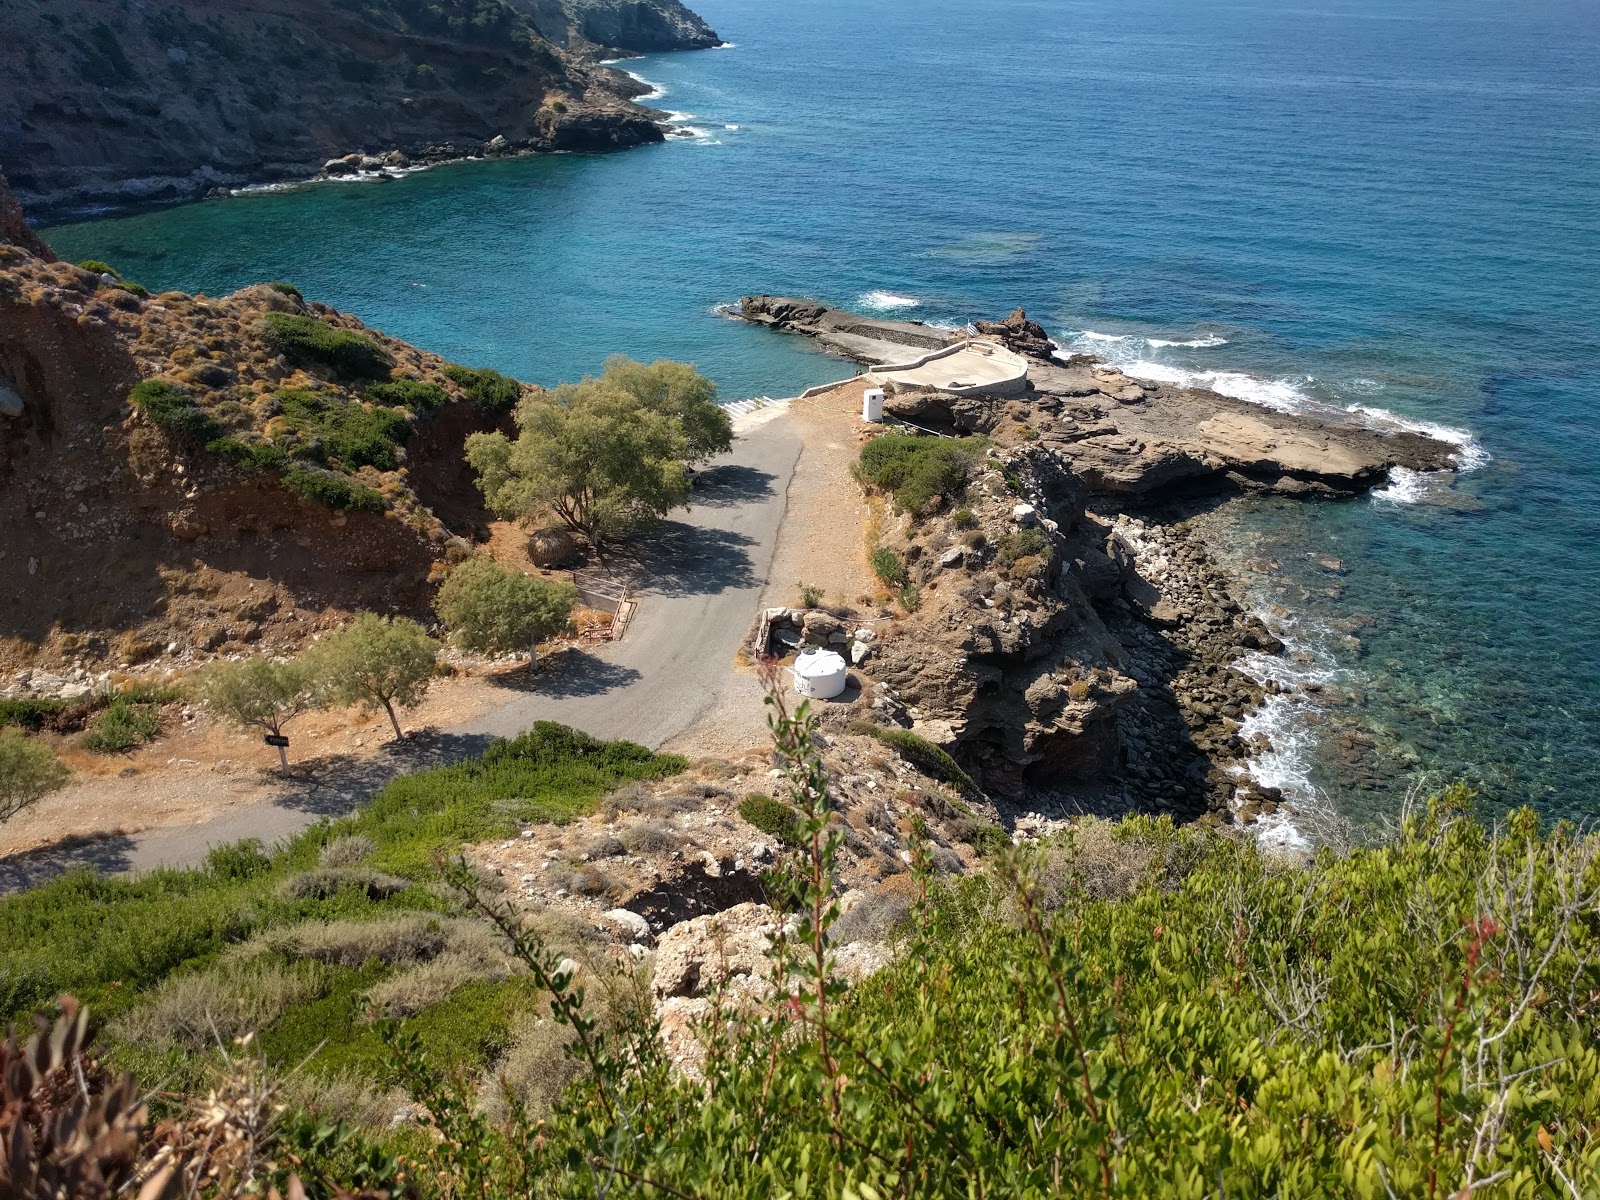 Photo of Paralia Likodimou V backed by cliffs